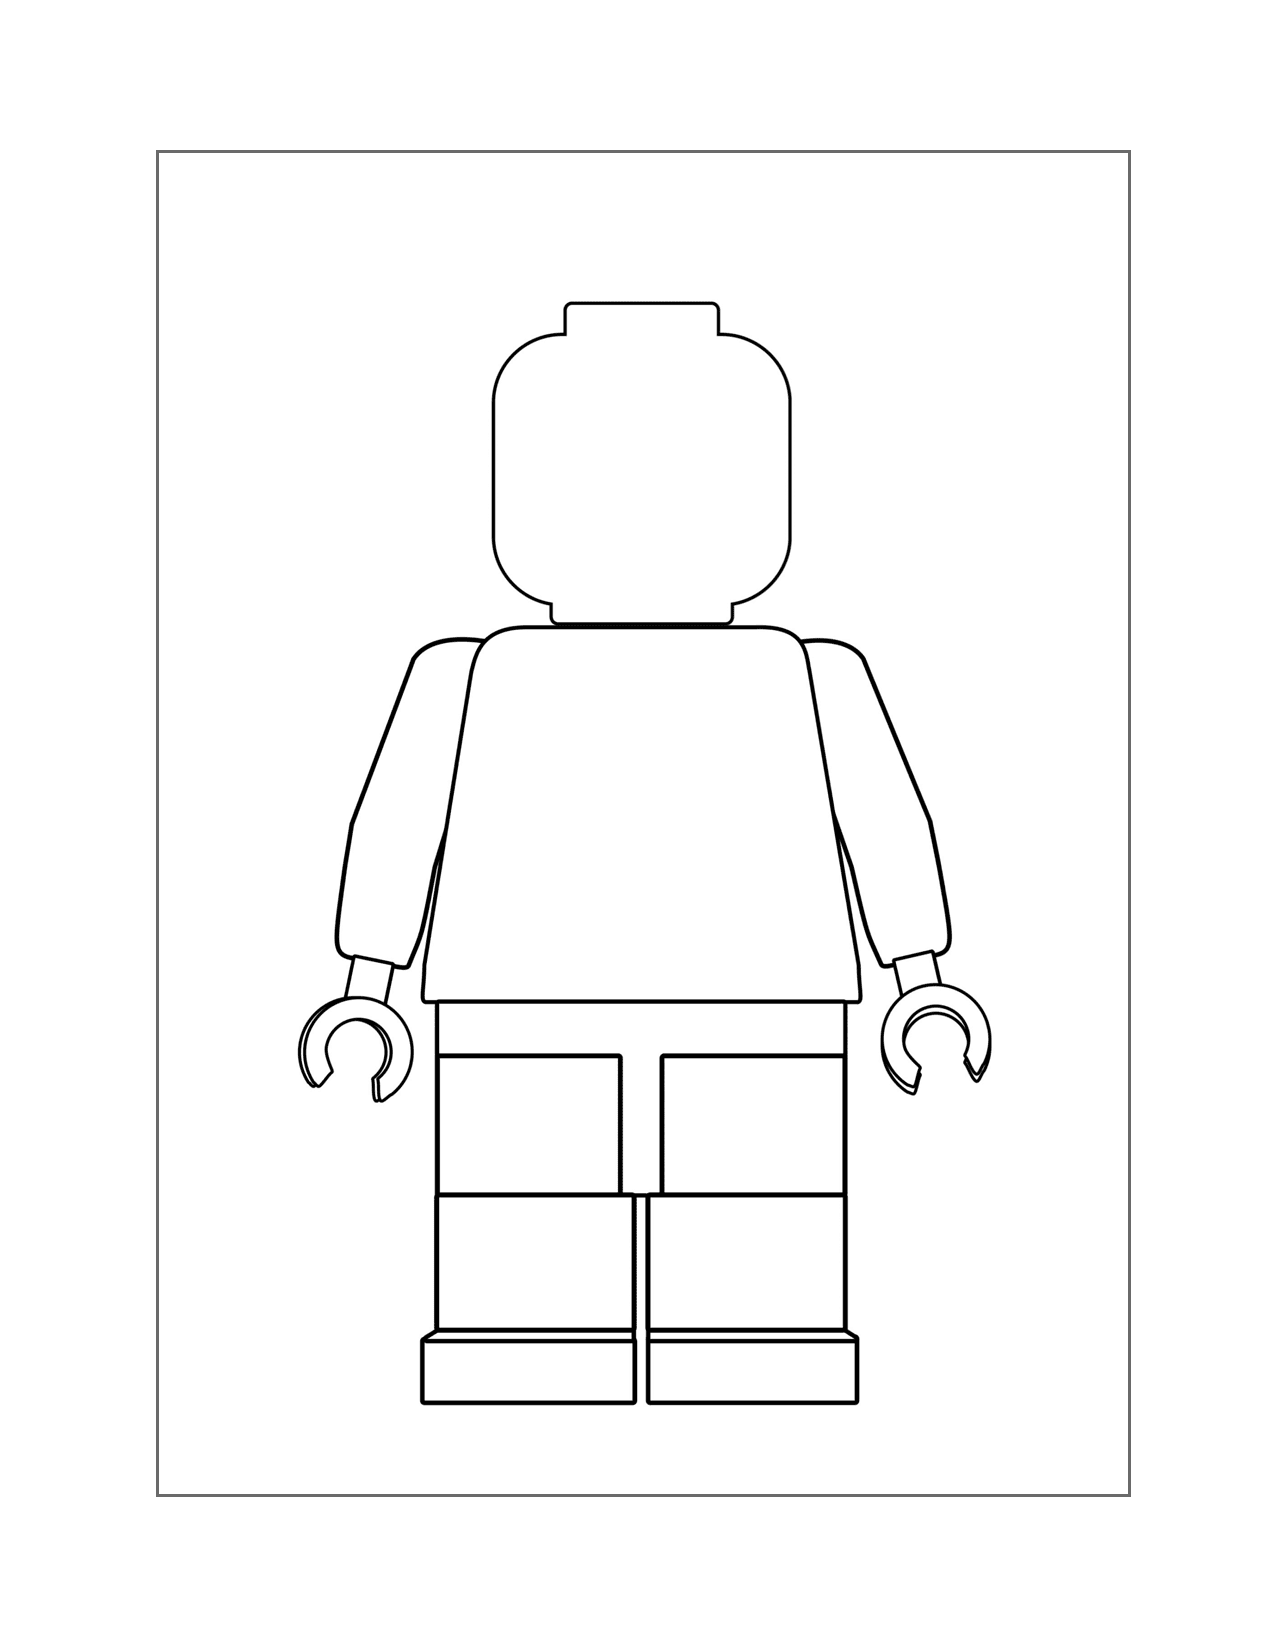 Blank Lego Man Coloring Page